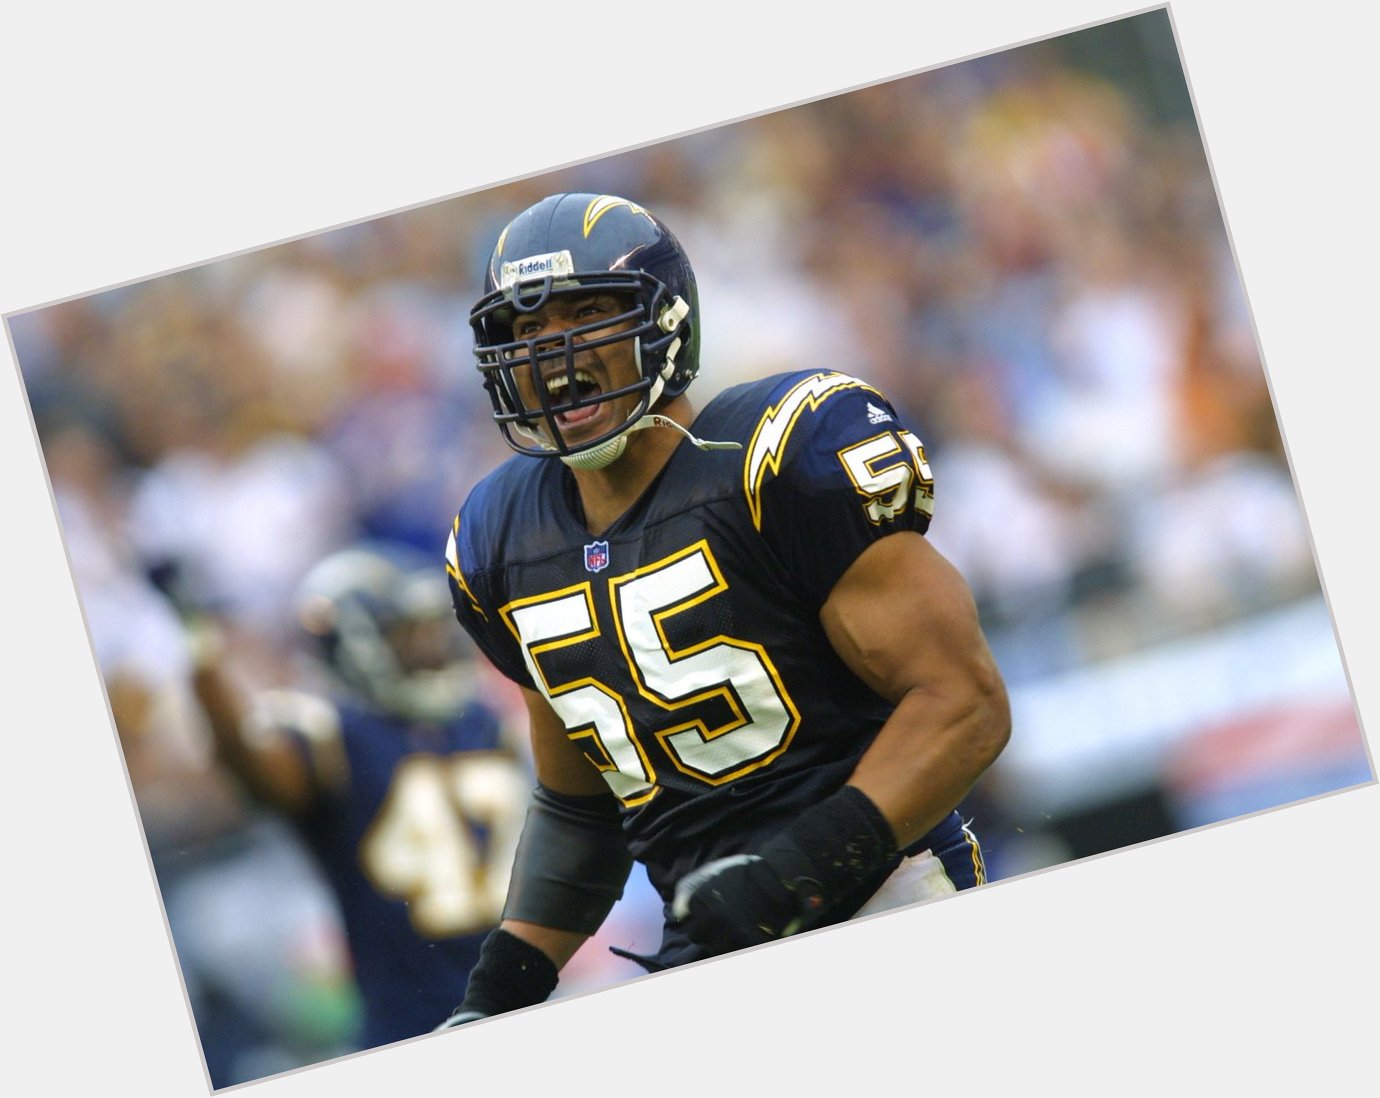 Happy Birthday to Junior Seau, who would have turned 49 today! 